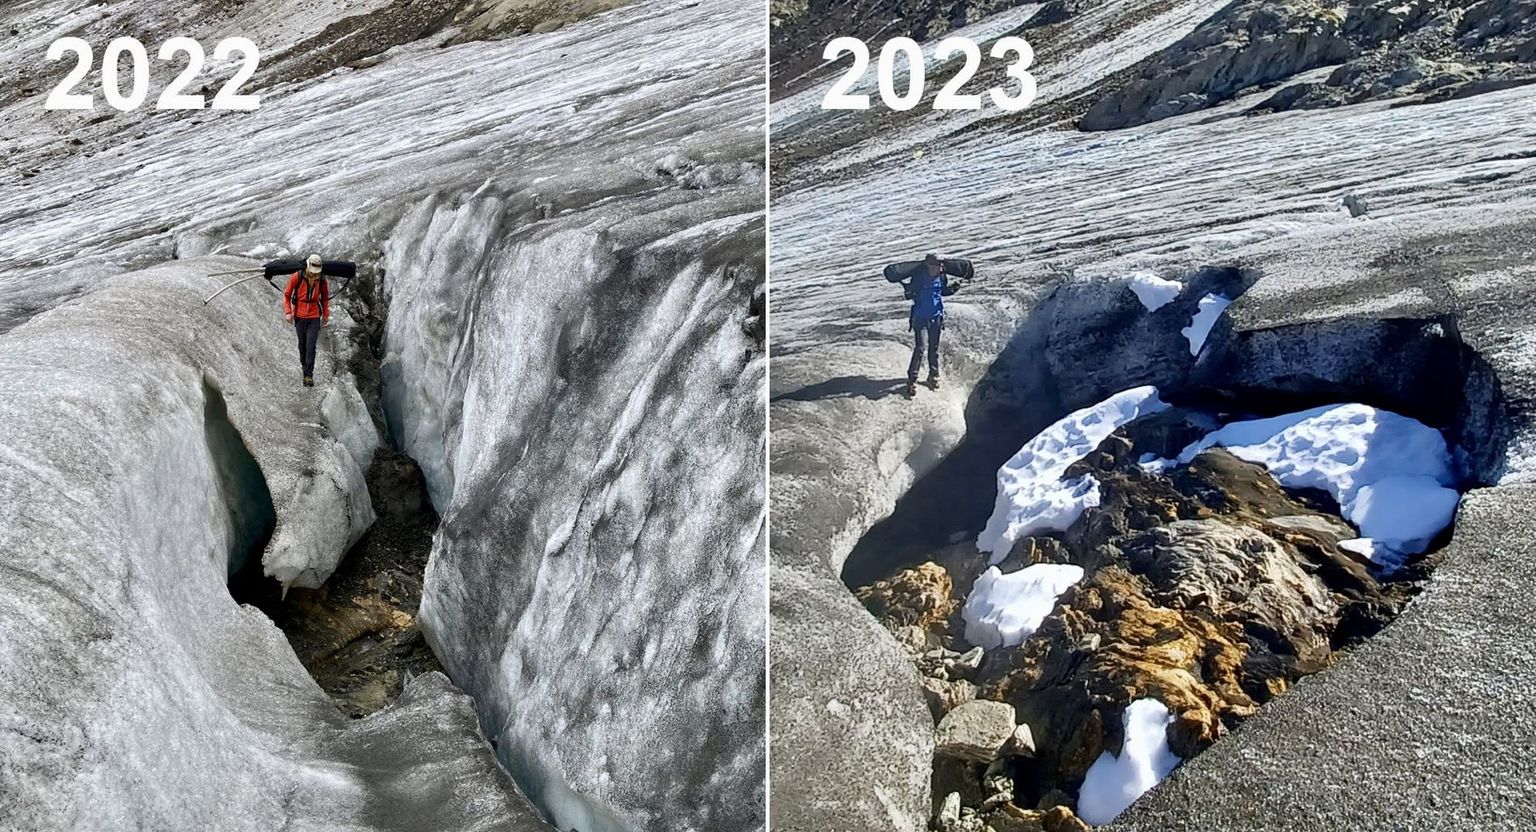 The disintegration of the Gries Glacier in Valais continues at a rapid pace. Rock was discovered a year ago at the bottom of a crevasse in the middle of the glacier. A veritable island of rocks has now emerged.